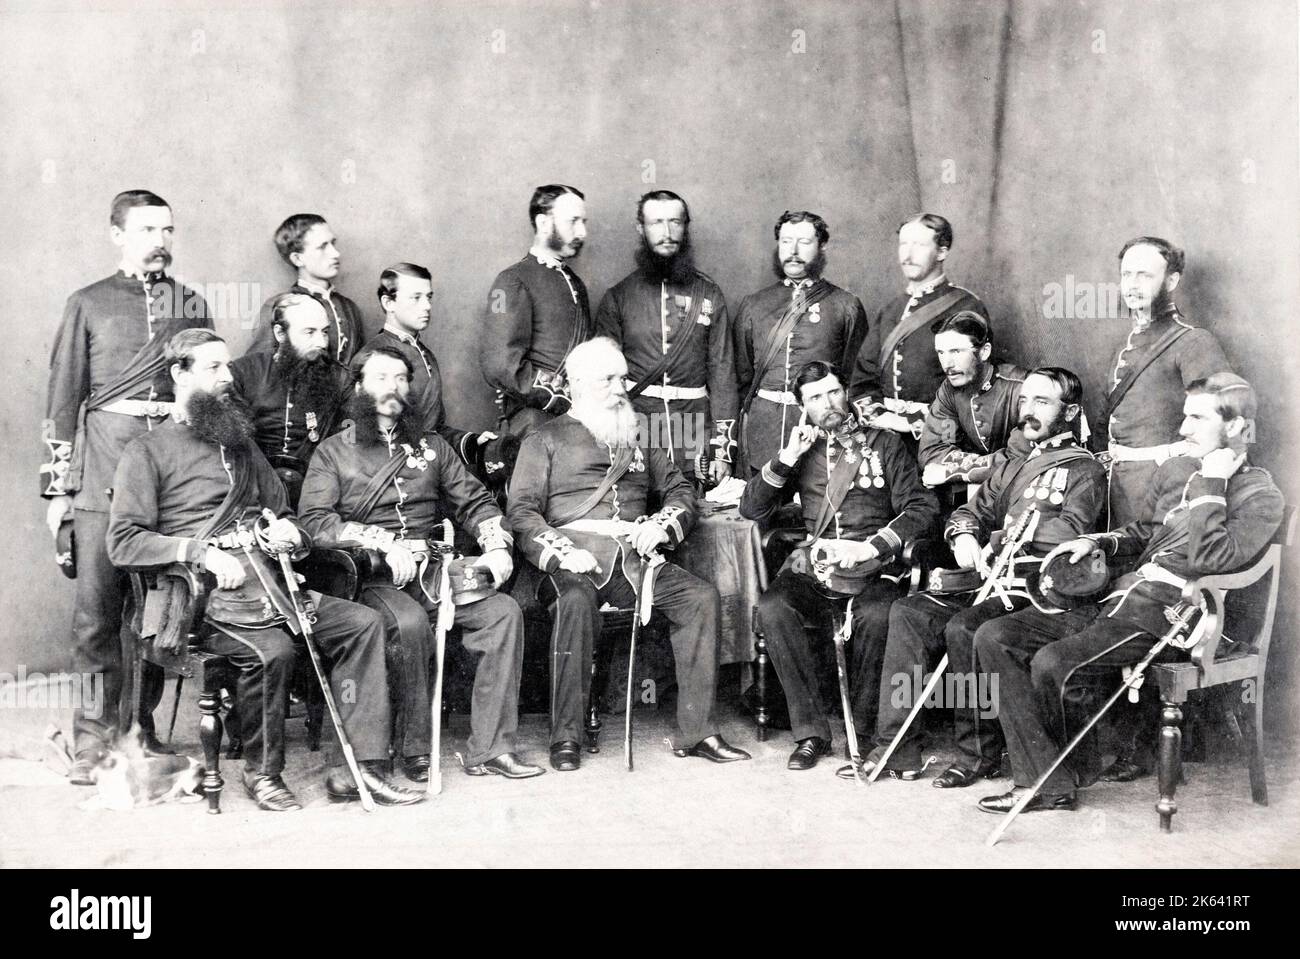 British army officers in India in the 19th century - these appear to be members of the 23th regiment of Foot (Royal Welsh Fusiliers) Stock Photo